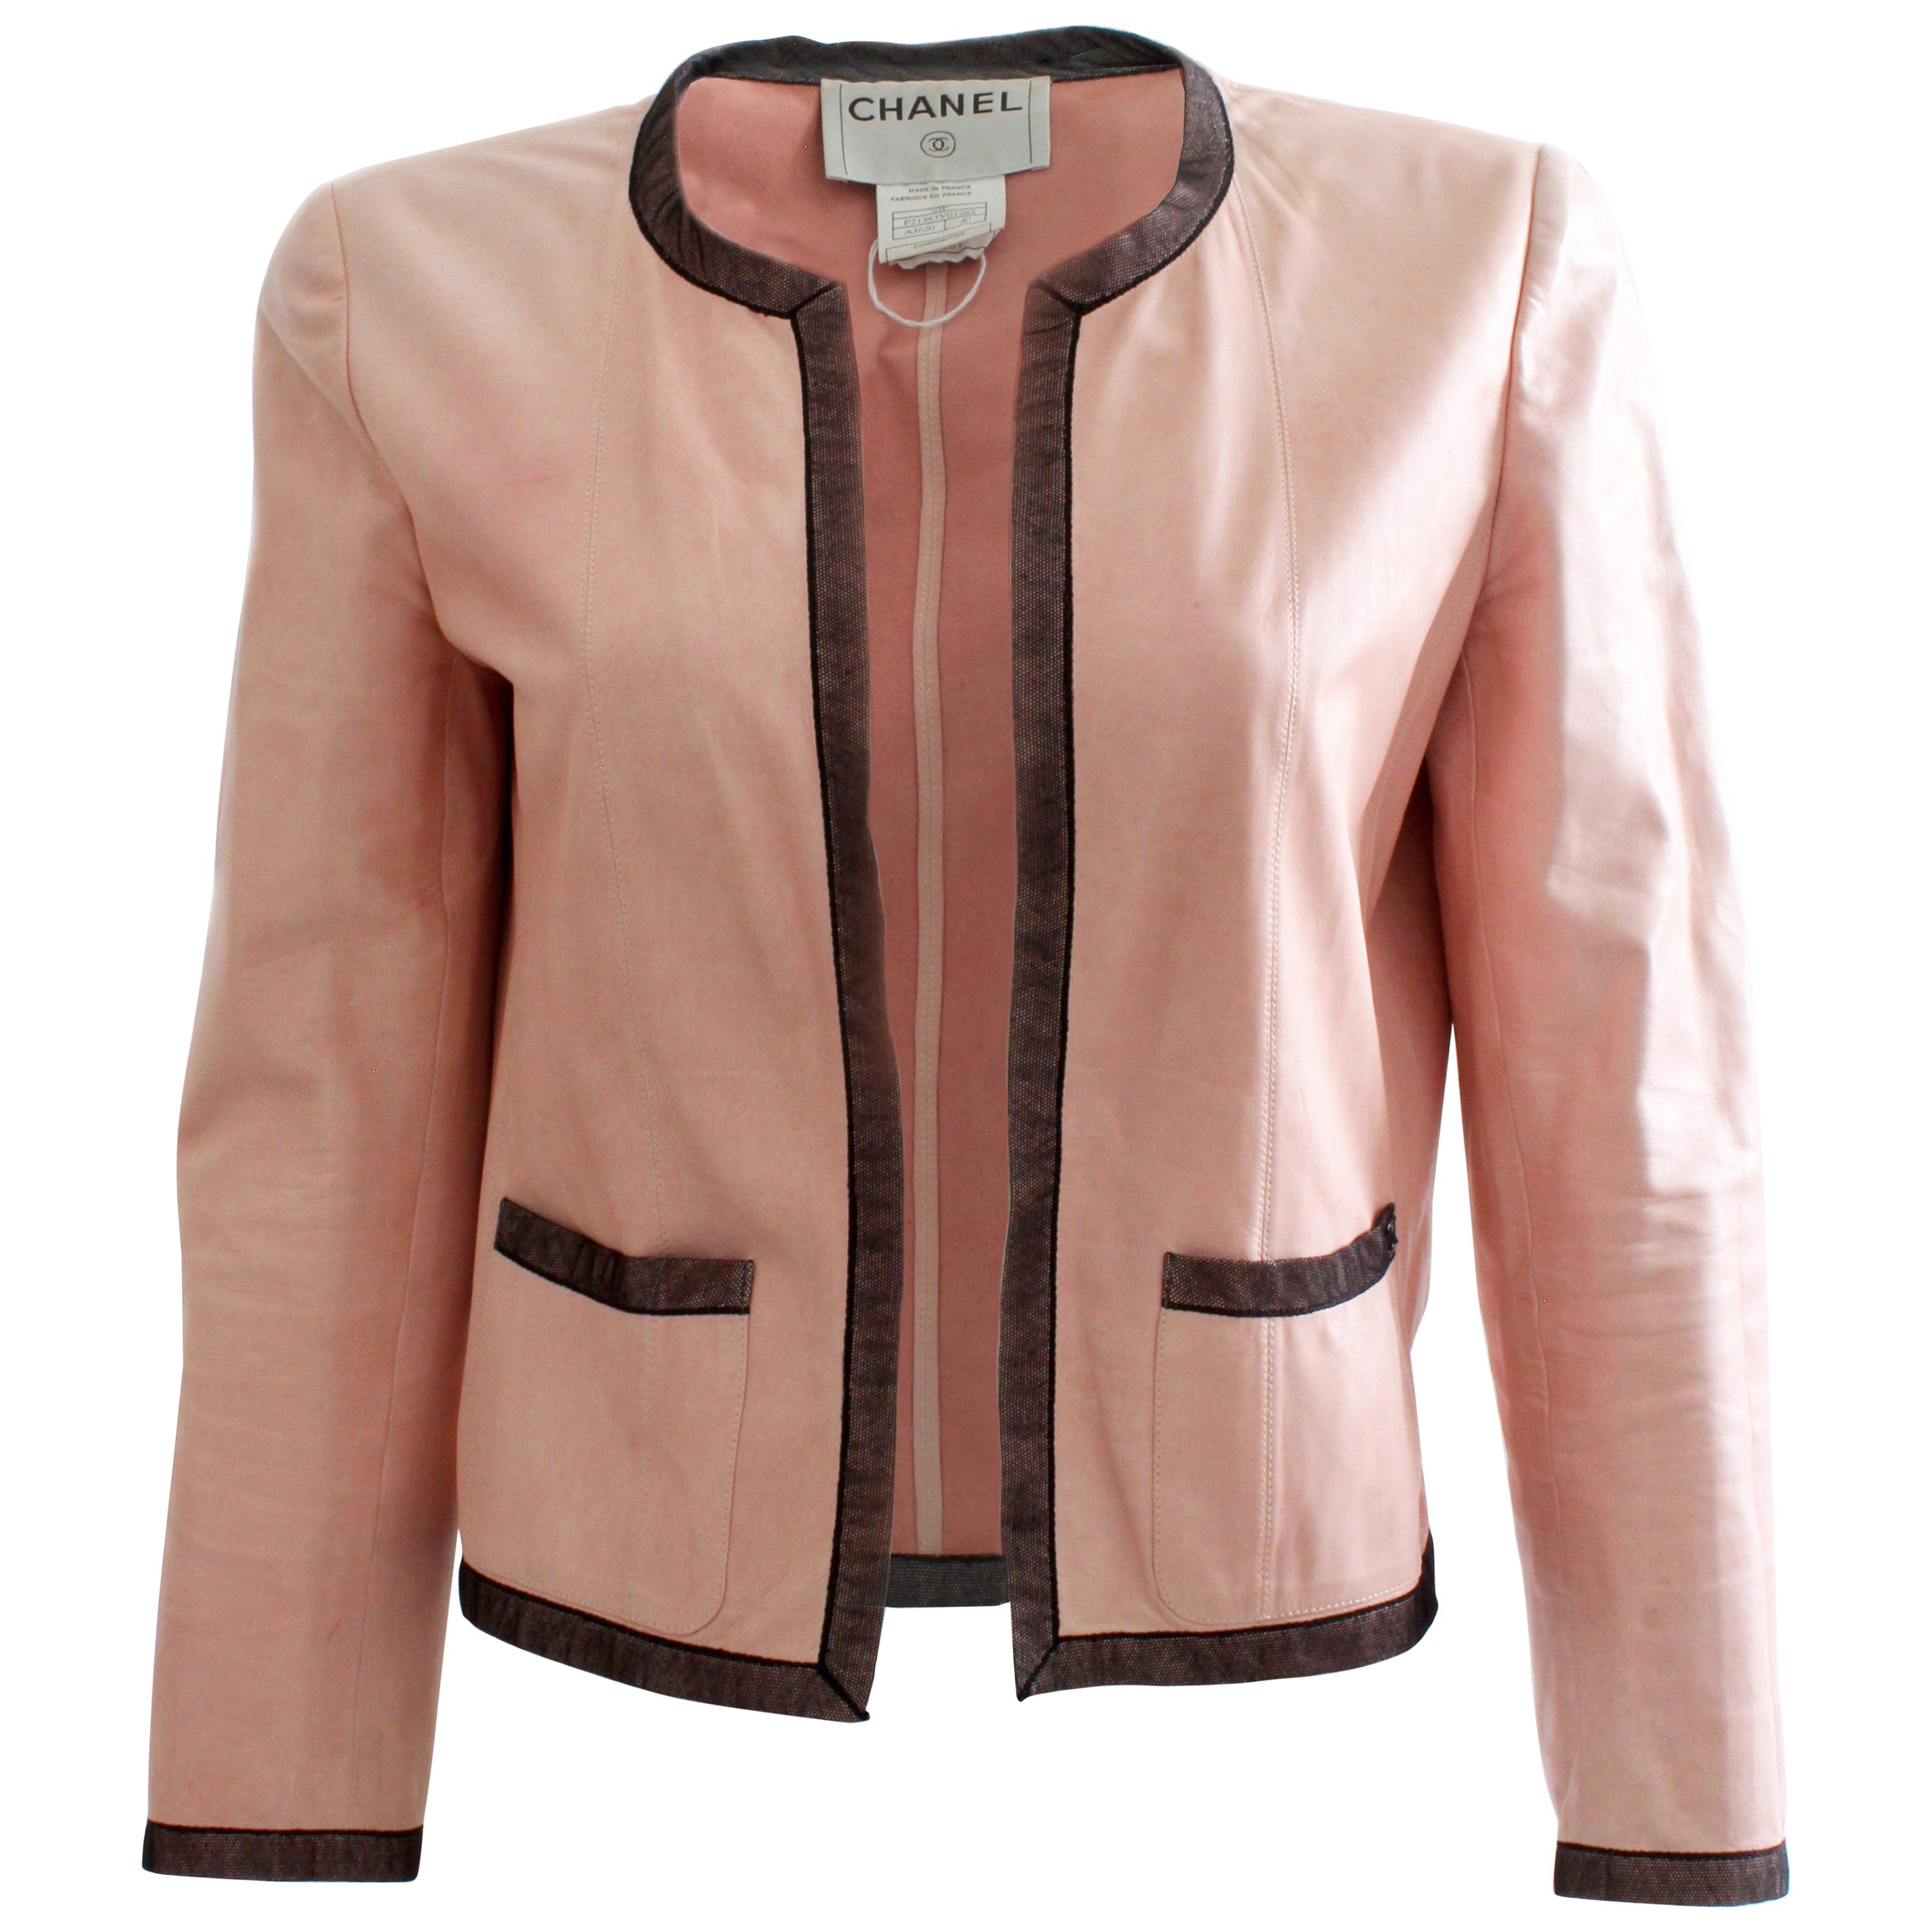 Chanel - Authenticated Jacket - Leather Pink For Woman, Very Good Condition